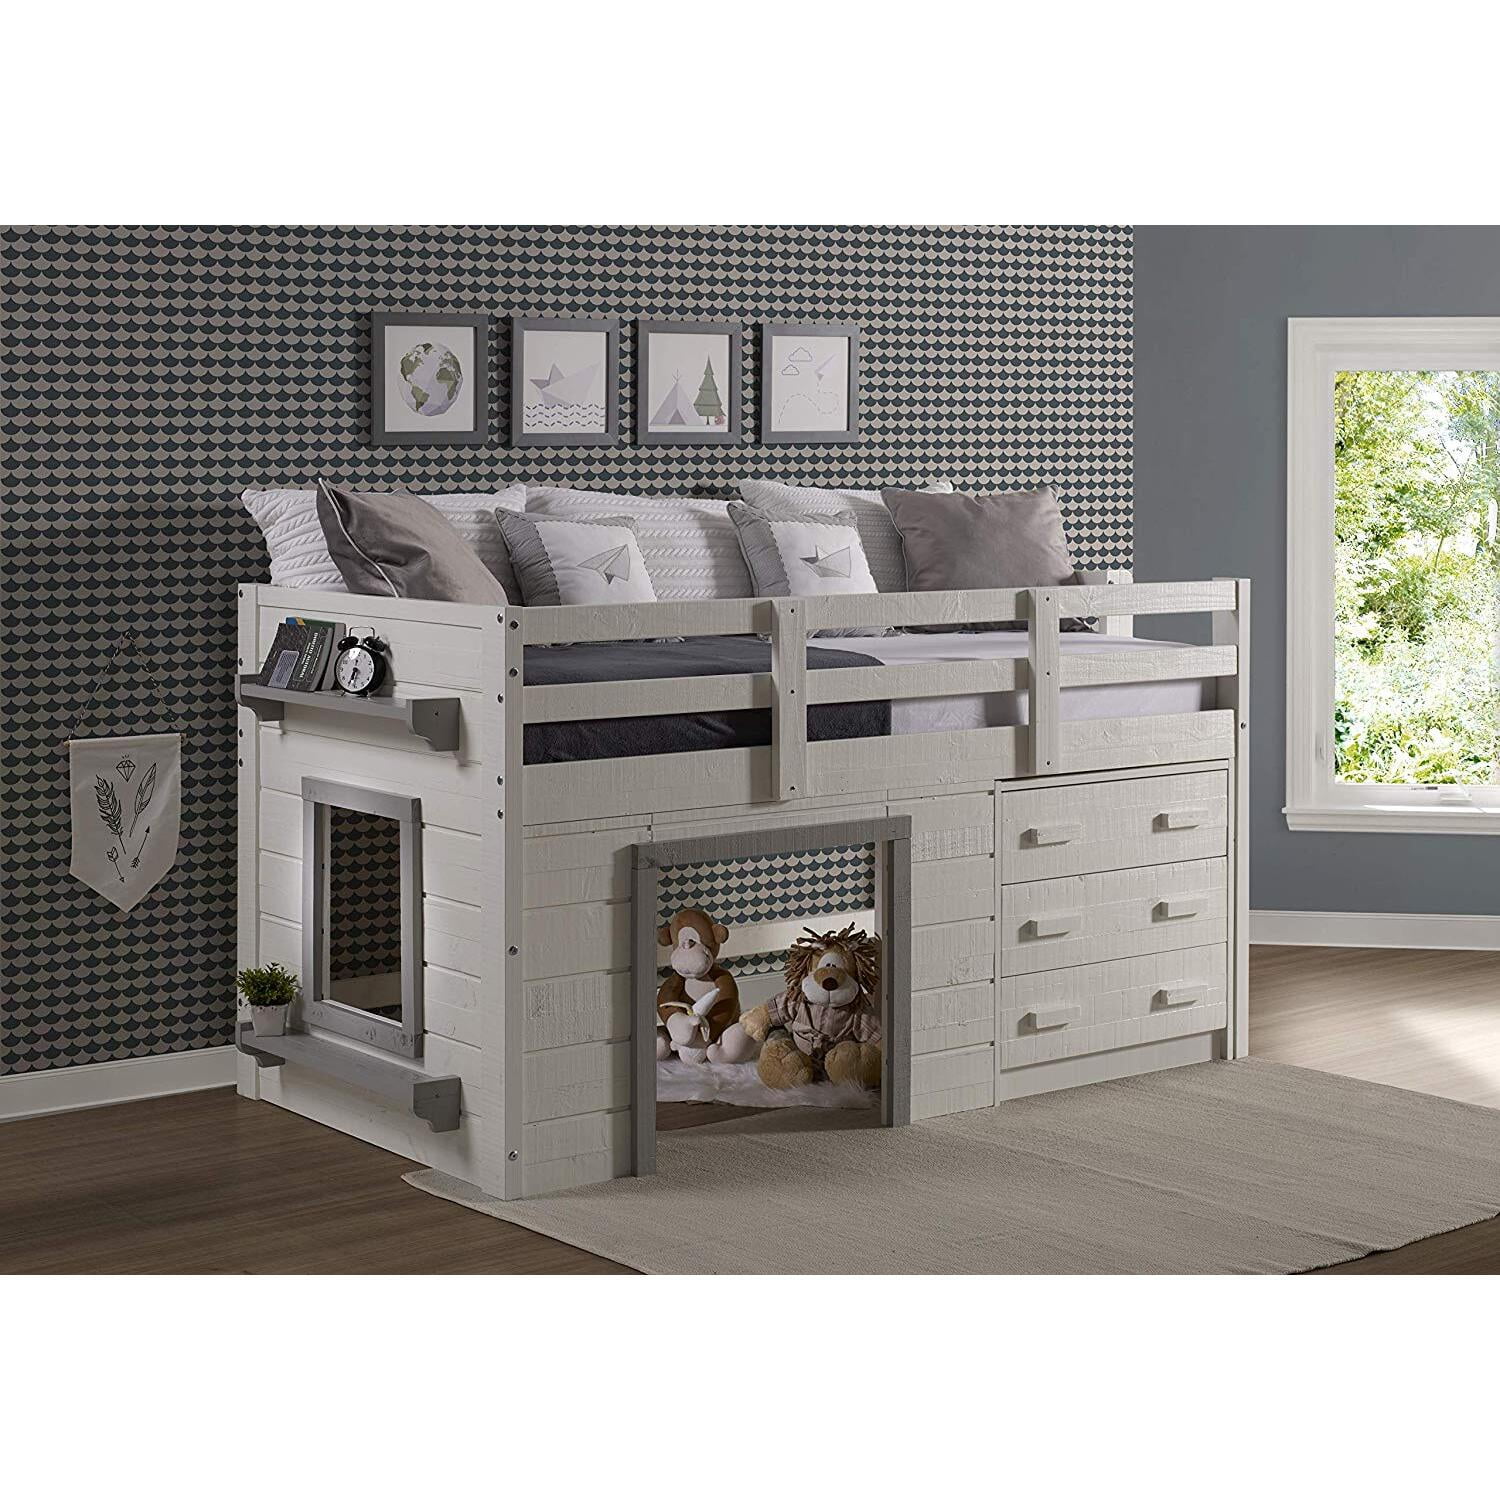 Donco Kids Wood Loft Bed, Off White Twin Bed